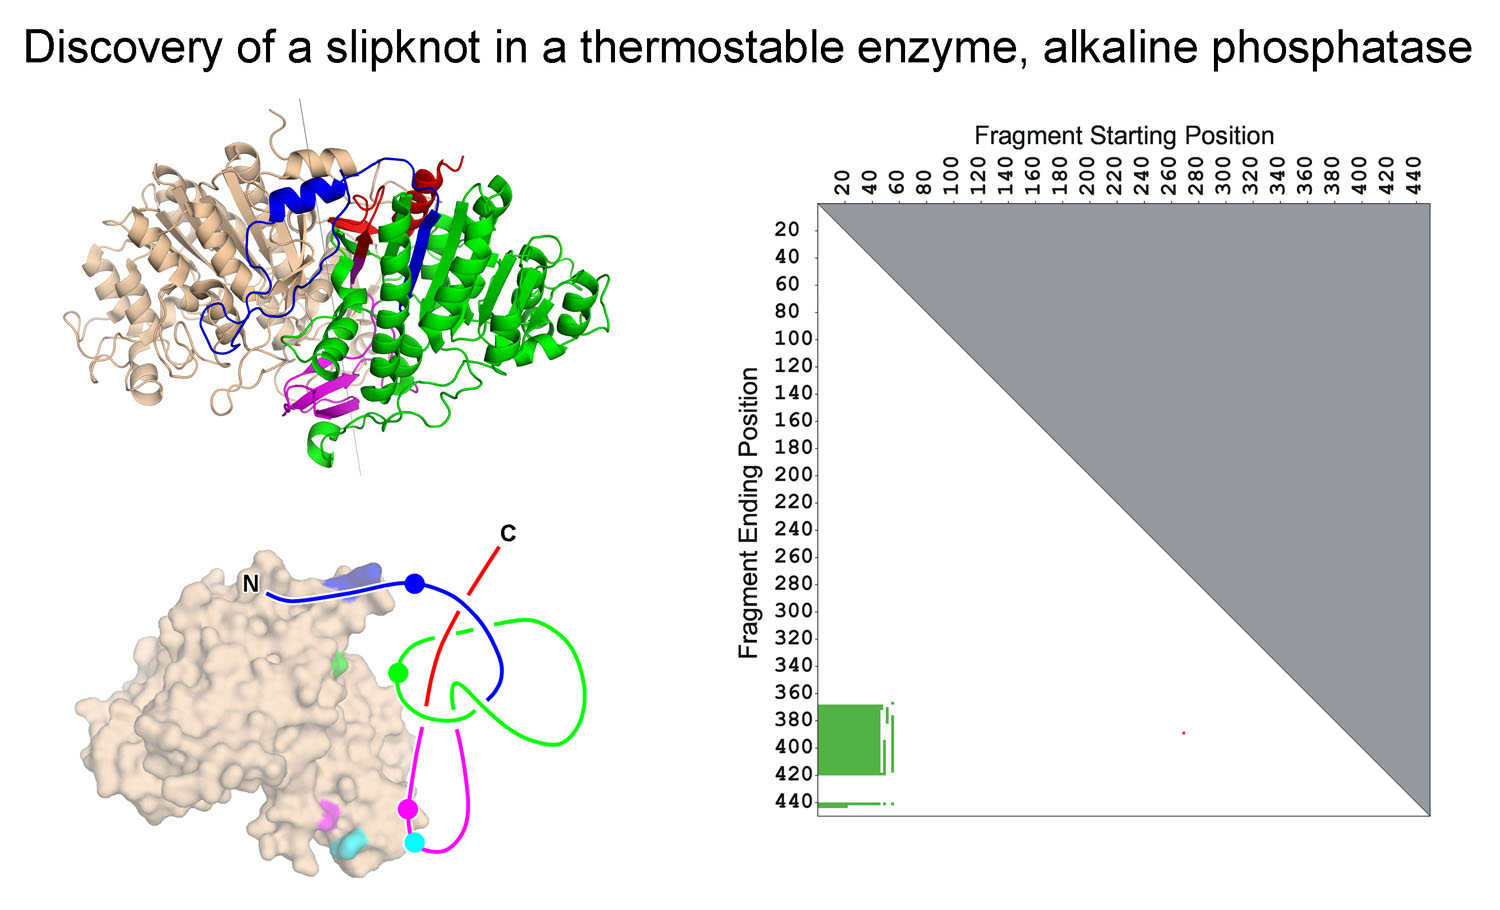 Discovery of the first protein slip knot, in the thermophilic enzyme alkaline phosphatase. The panel on the right shows a knot plot that revealed that a partial structure within the intact fold forms a knot. (Adapted from King, et al. (2007)) 